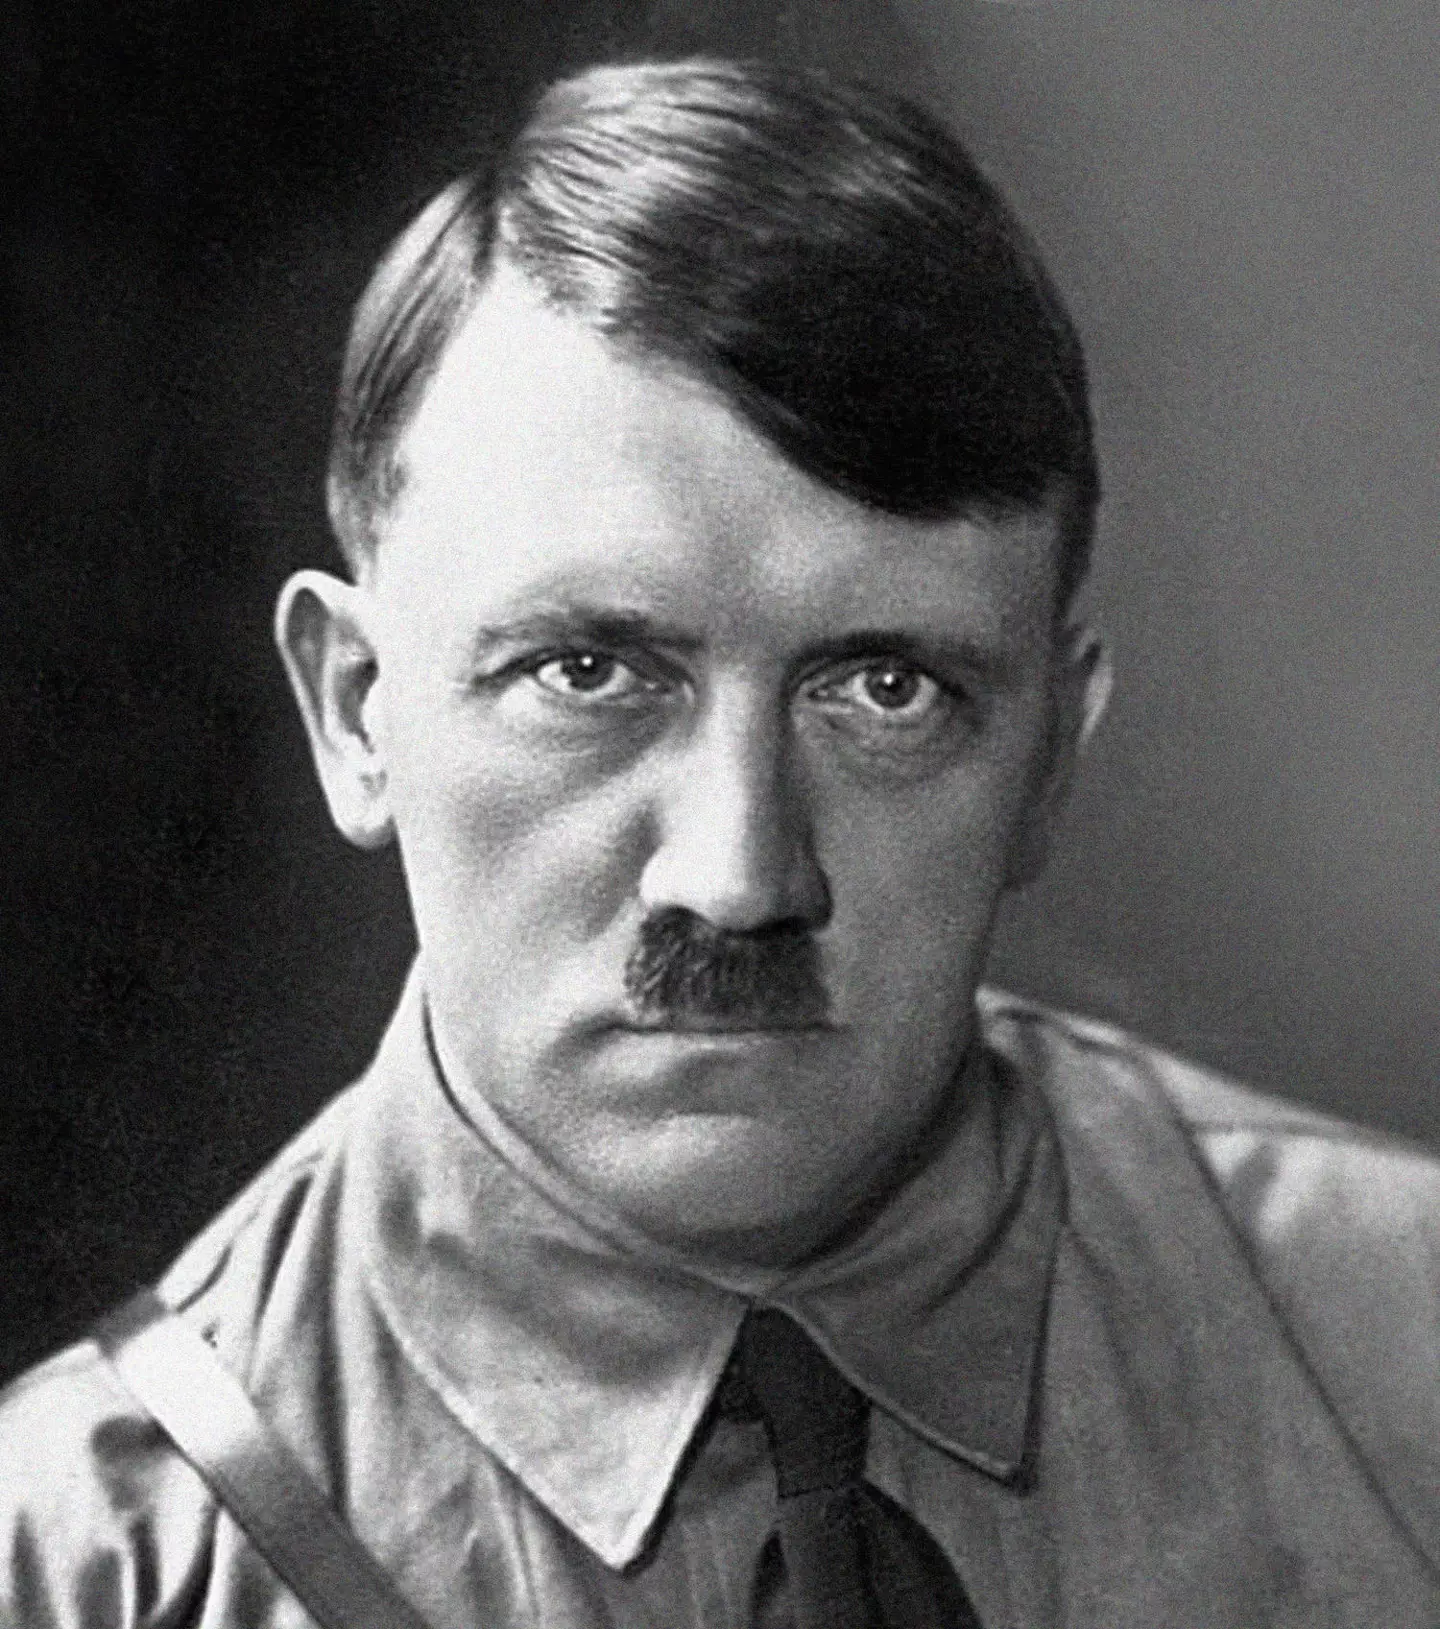 According to Bryan he saw Hitler down in hell suffering all of the torments he inflicted on other people.